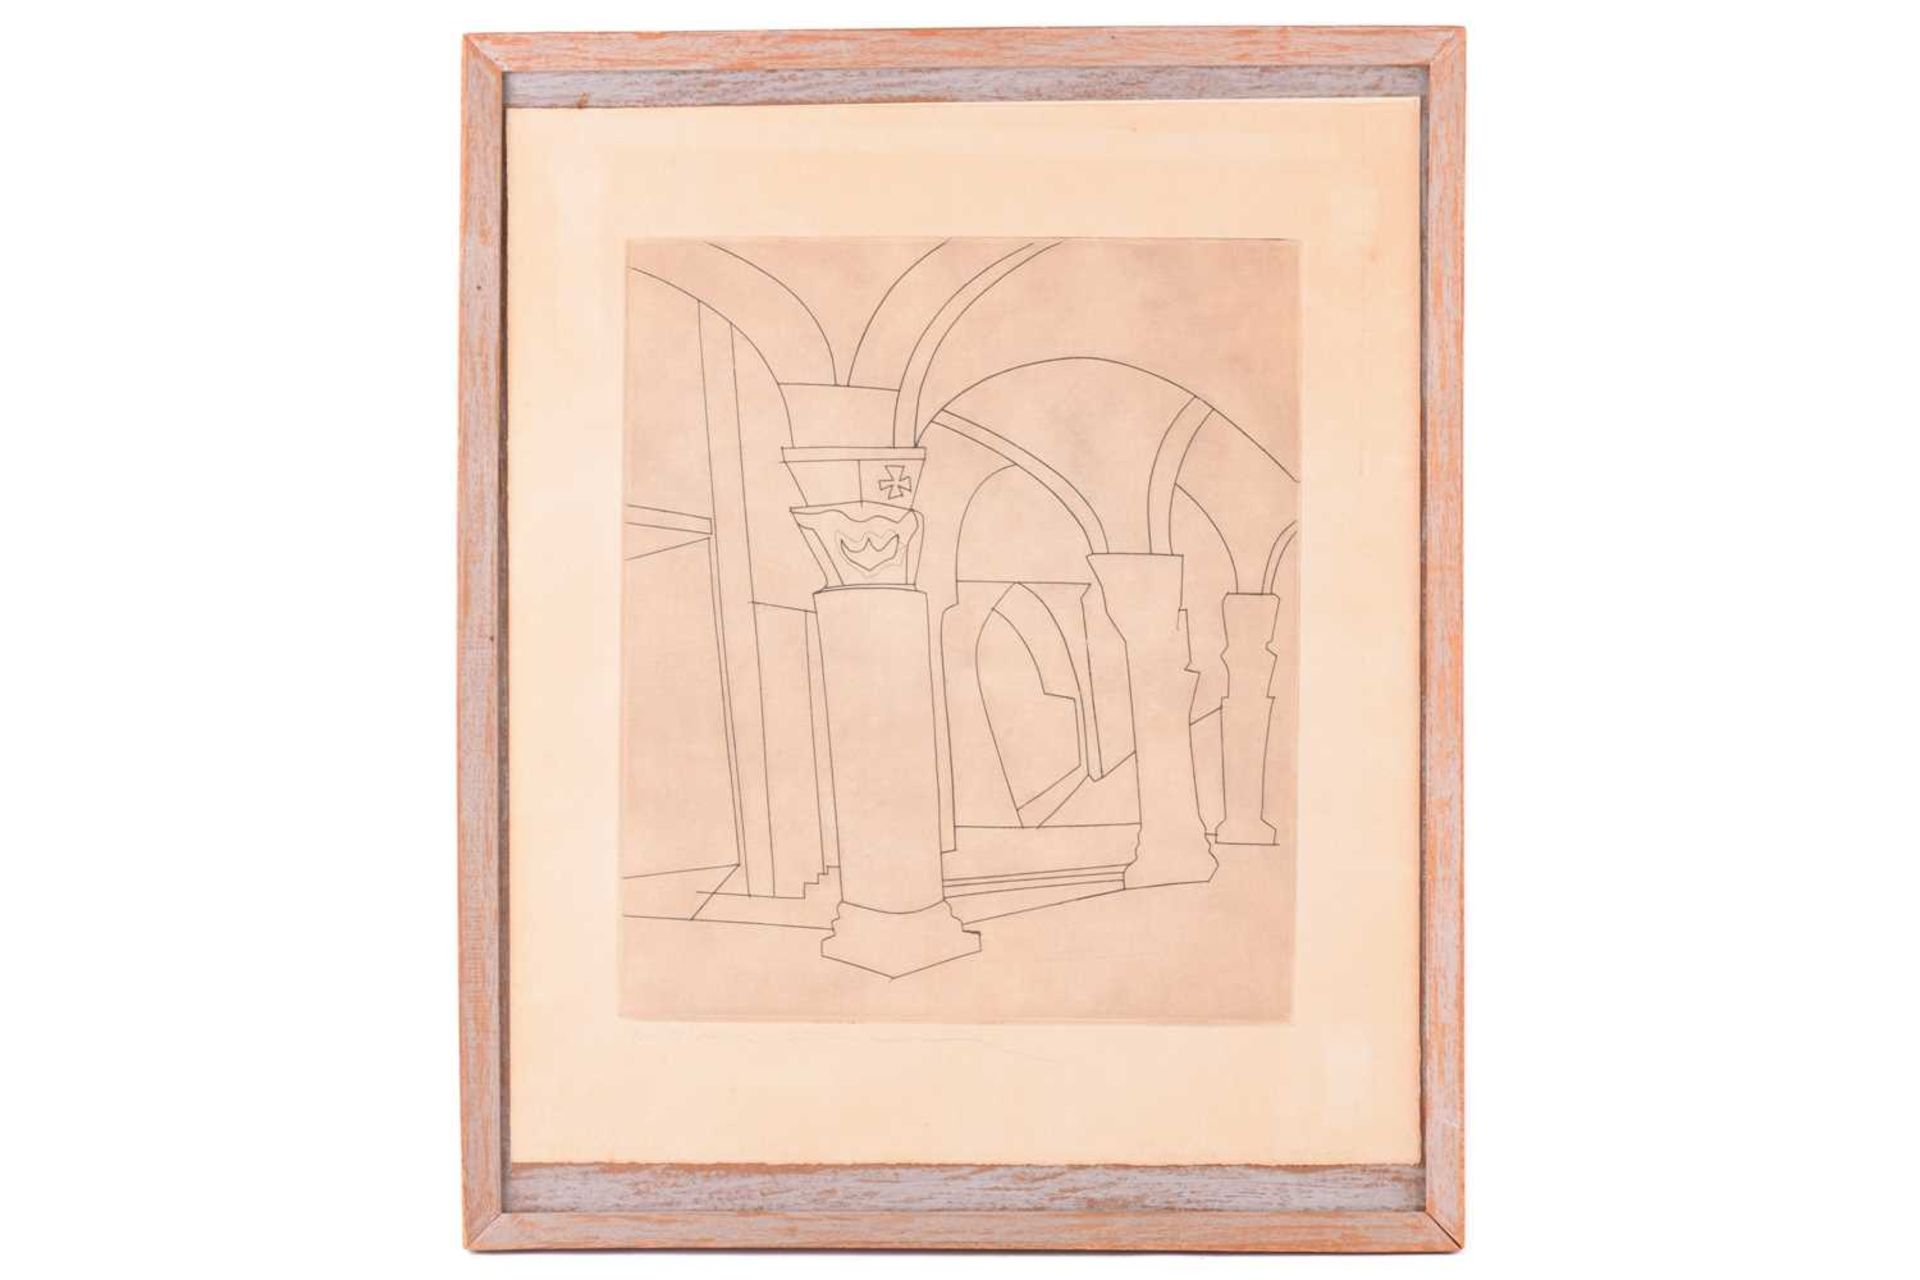 Ben Nicholson (1894 - 1982), Aquileia, signed and dated 65 in pencil, titled and inscribed